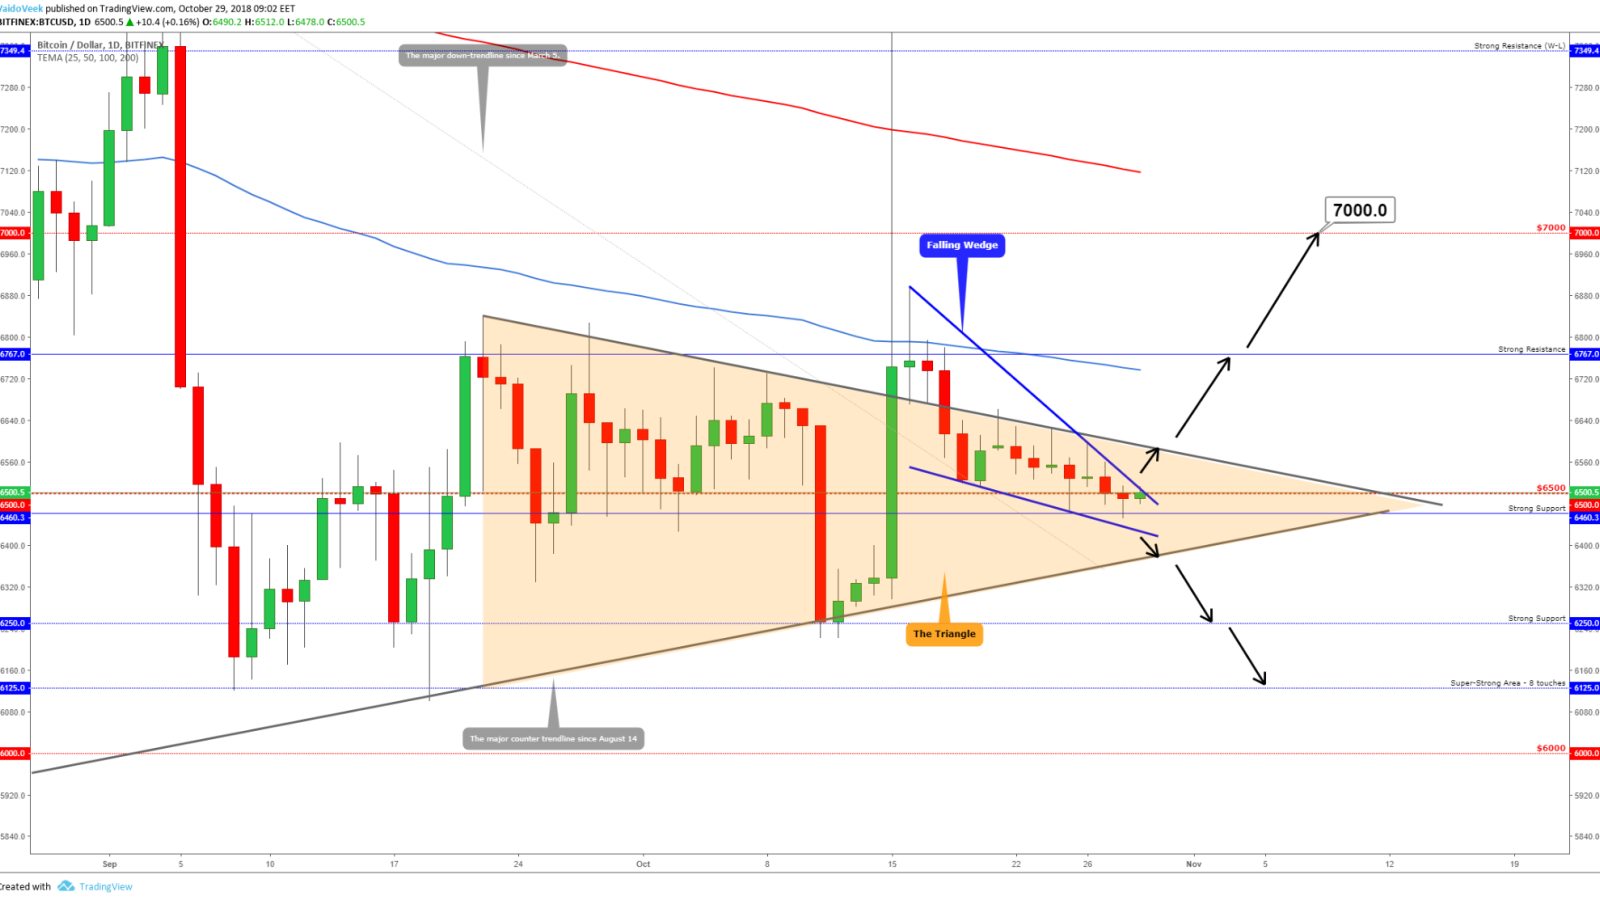 The daily chart